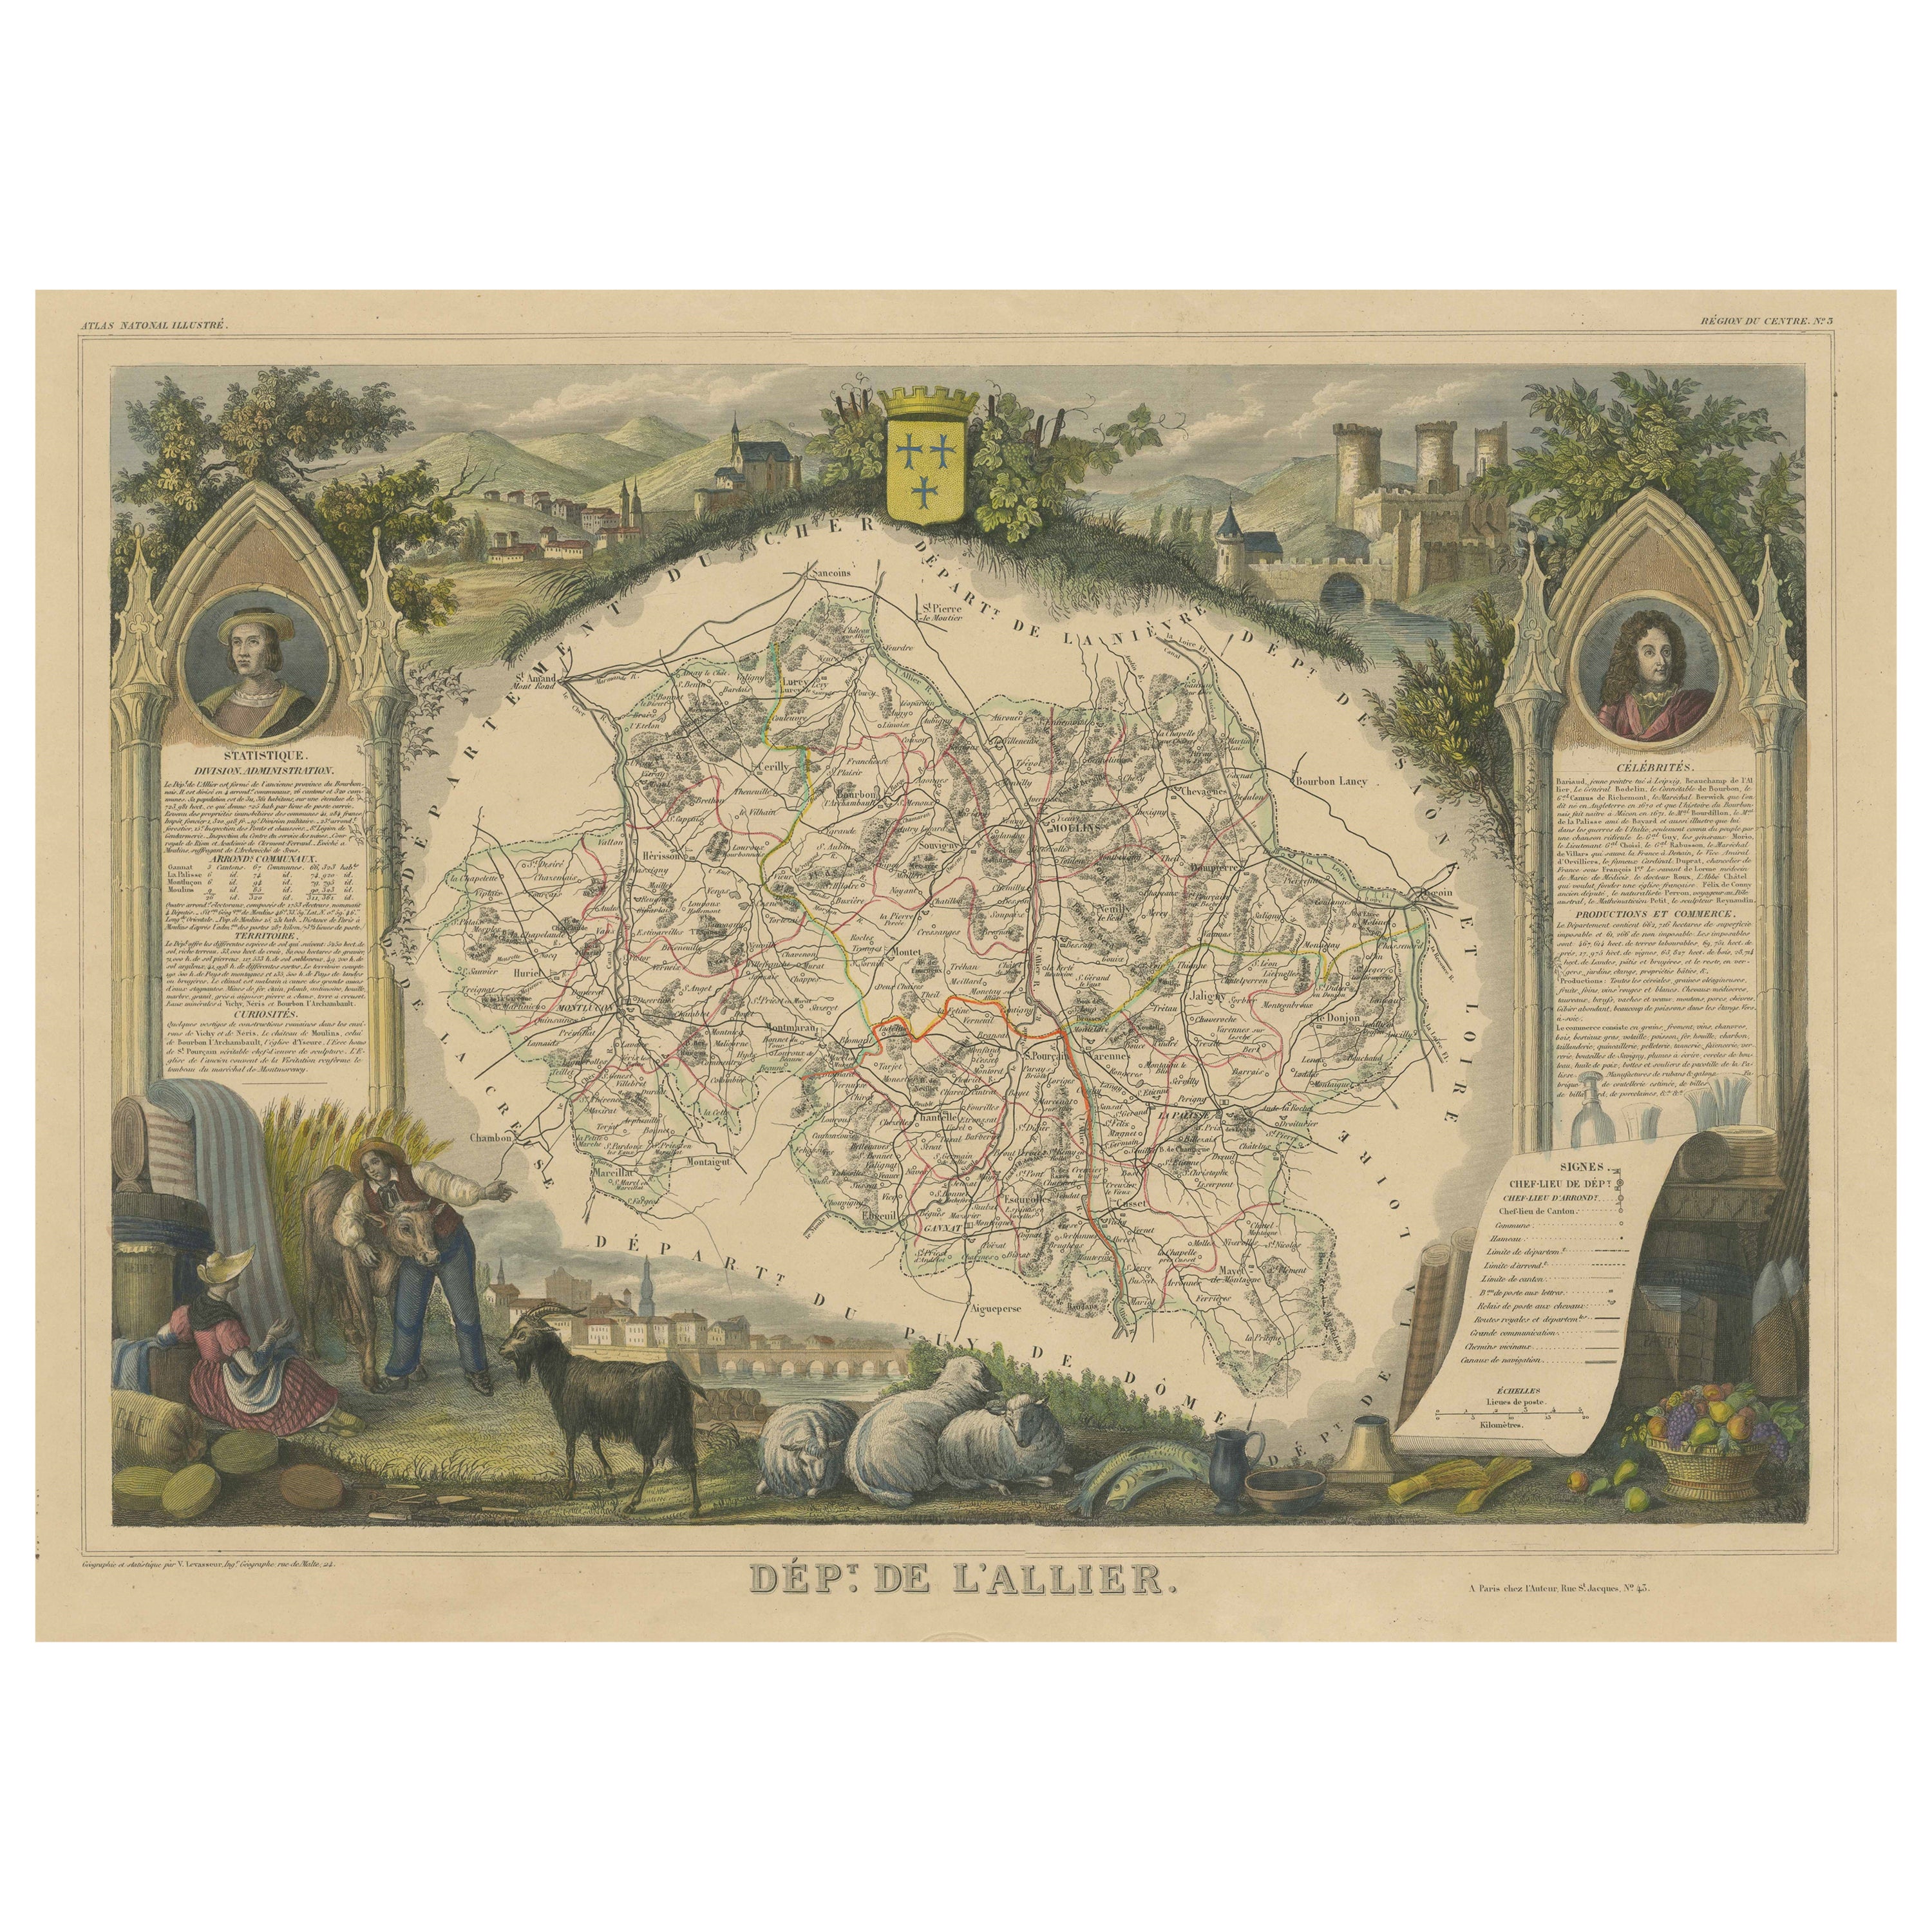 Hand Colored Antique Map of the Department of L'allier, France